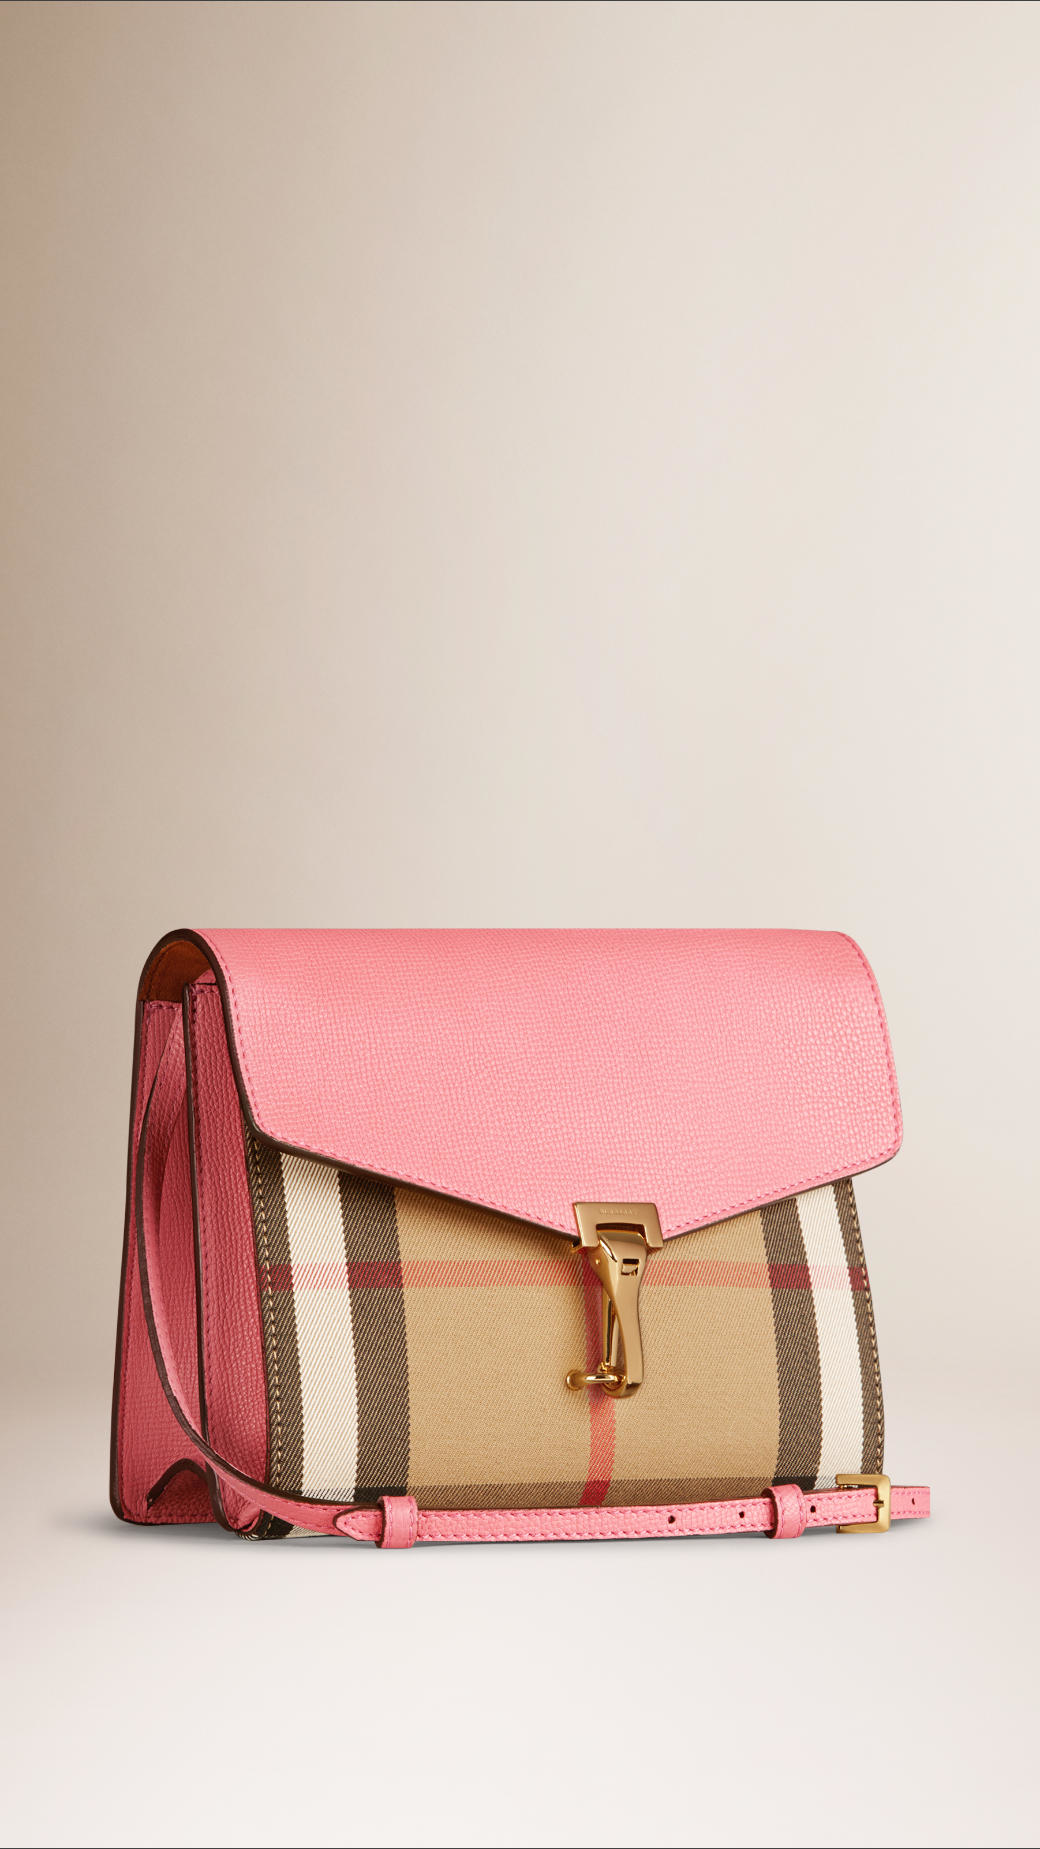 Burberry Small House Check and Leather Cross-Body Bag in Pink - Lyst